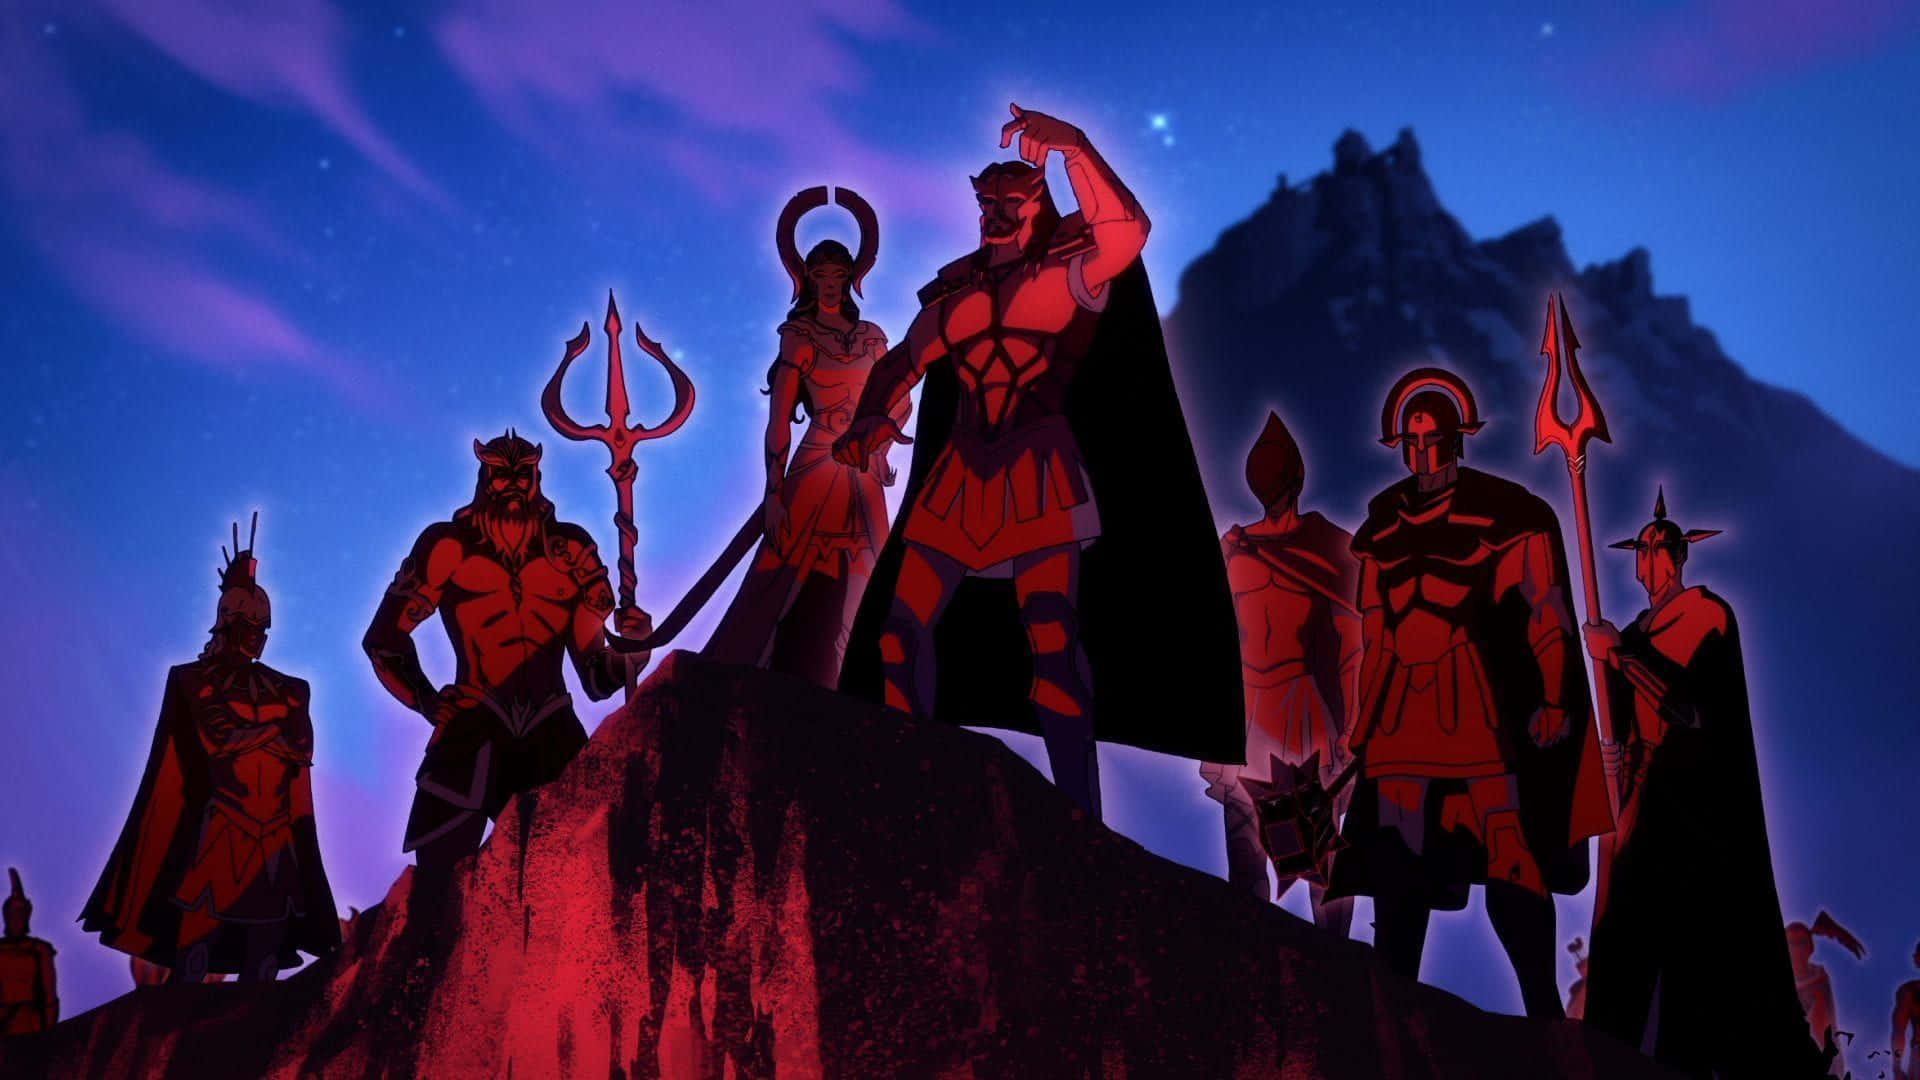 A Group Of People Standing On A Mountain With A Red Sky Wallpaper